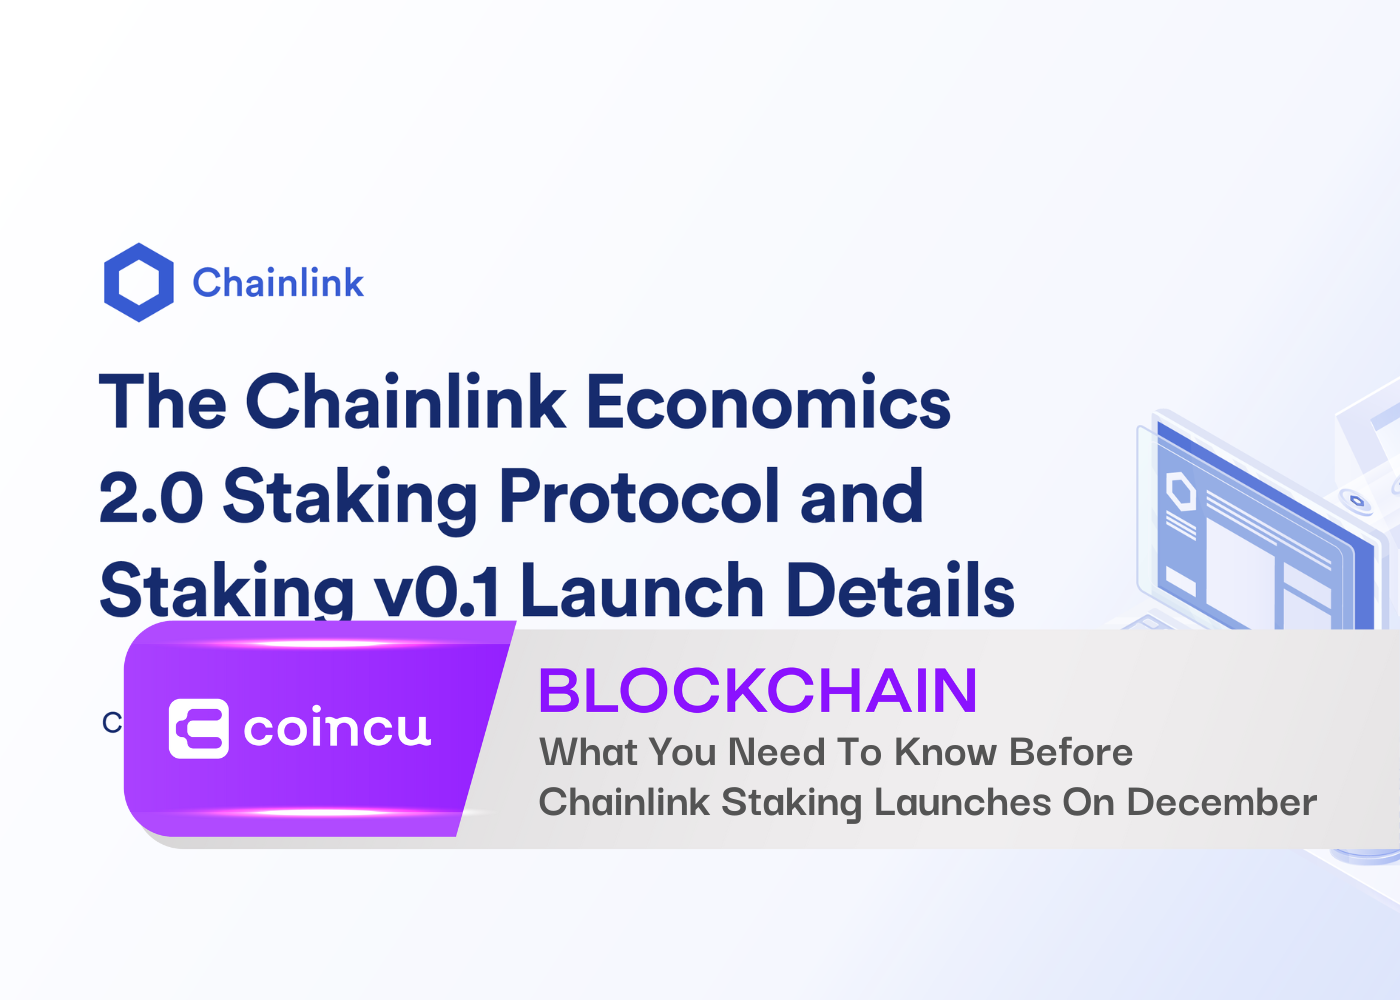 What You Need To Know Before Chainlink Staking